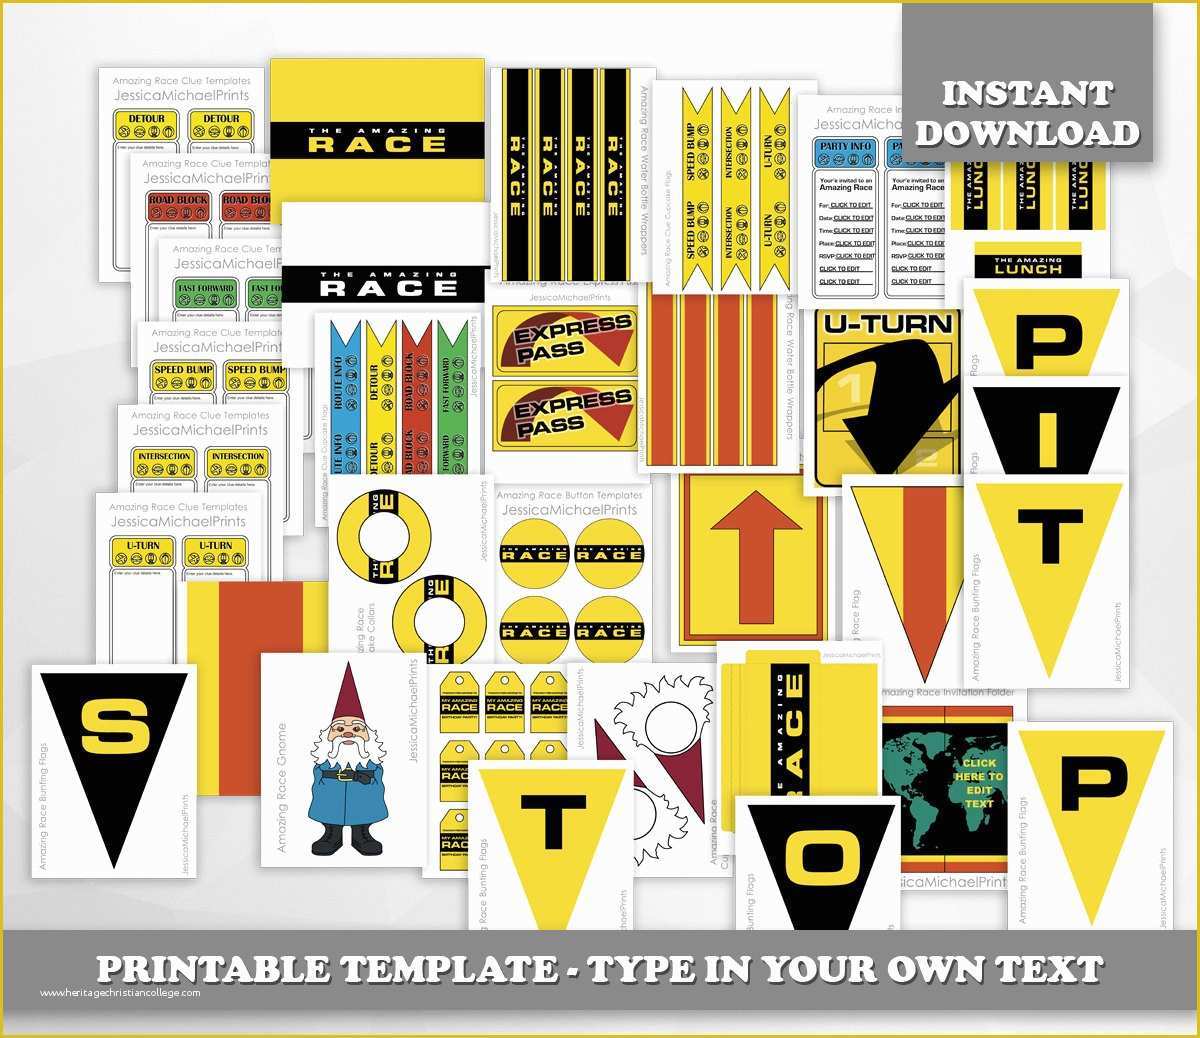 Amazing Race Editable Templates Free Of Limited Time the Amazing Race Party Printables Digital